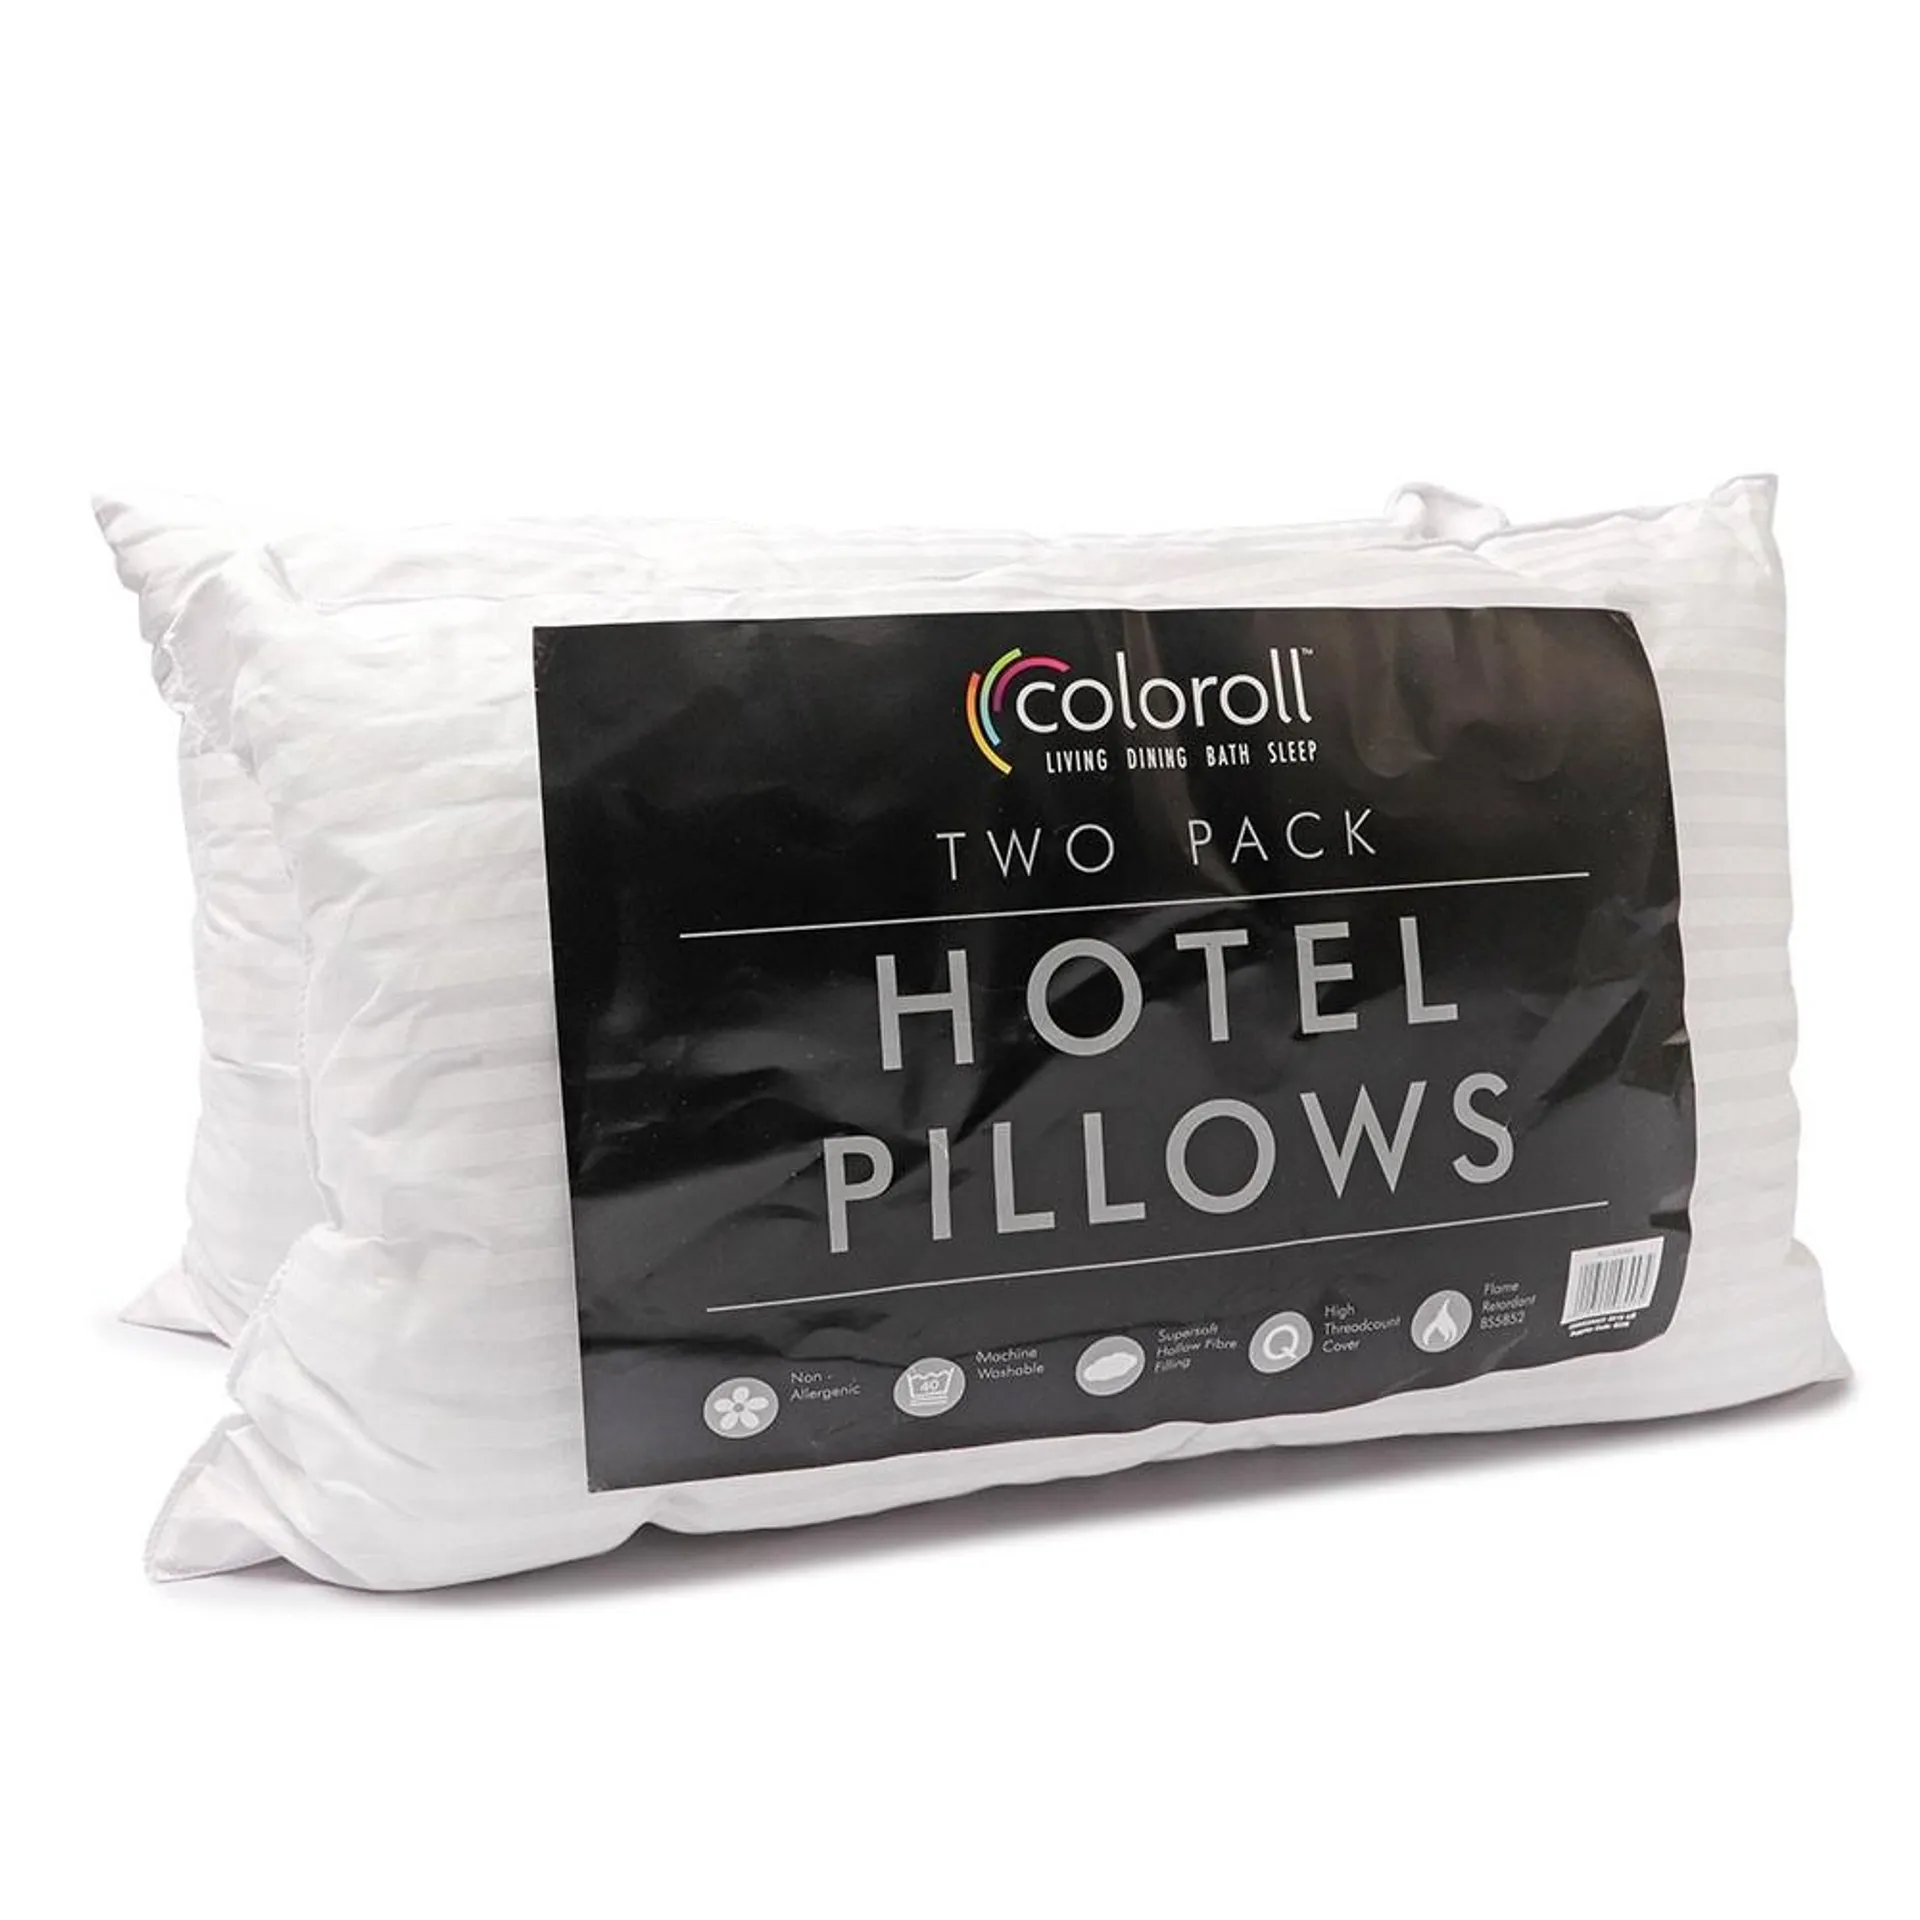 HOTEL PILLOWS 2 PACK